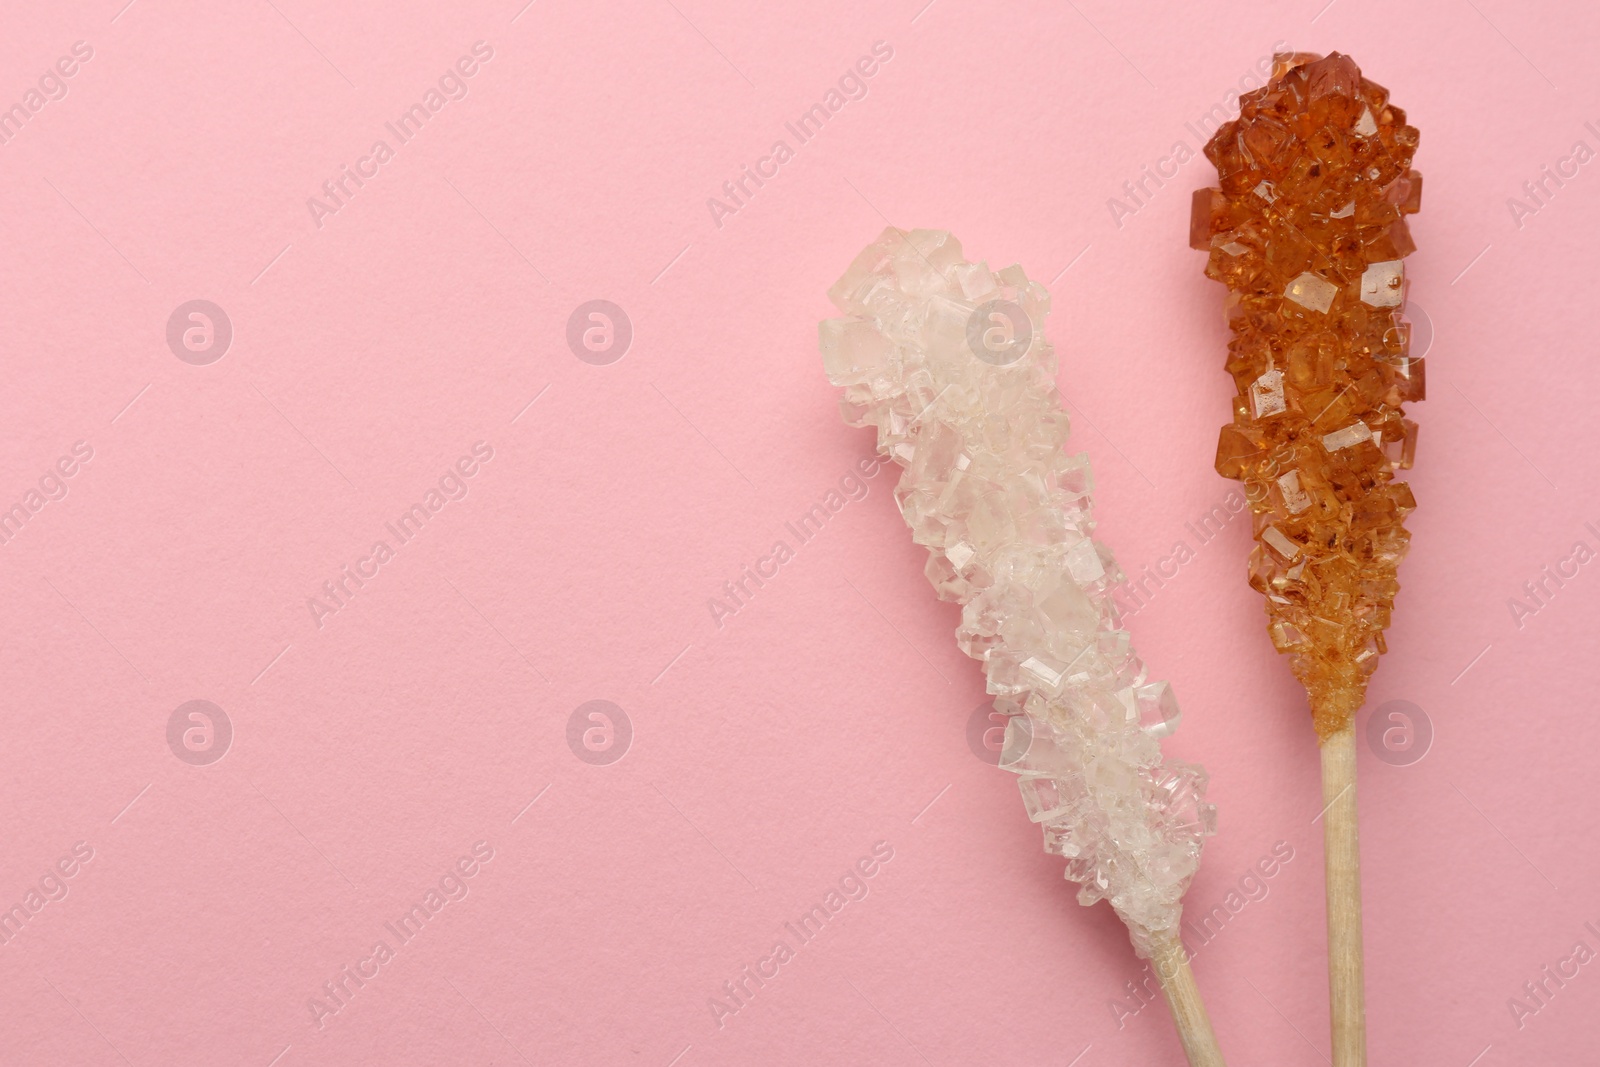 Photo of Wooden sticks with sugar crystals and space for text on pink background, flat lay. Tasty rock candies